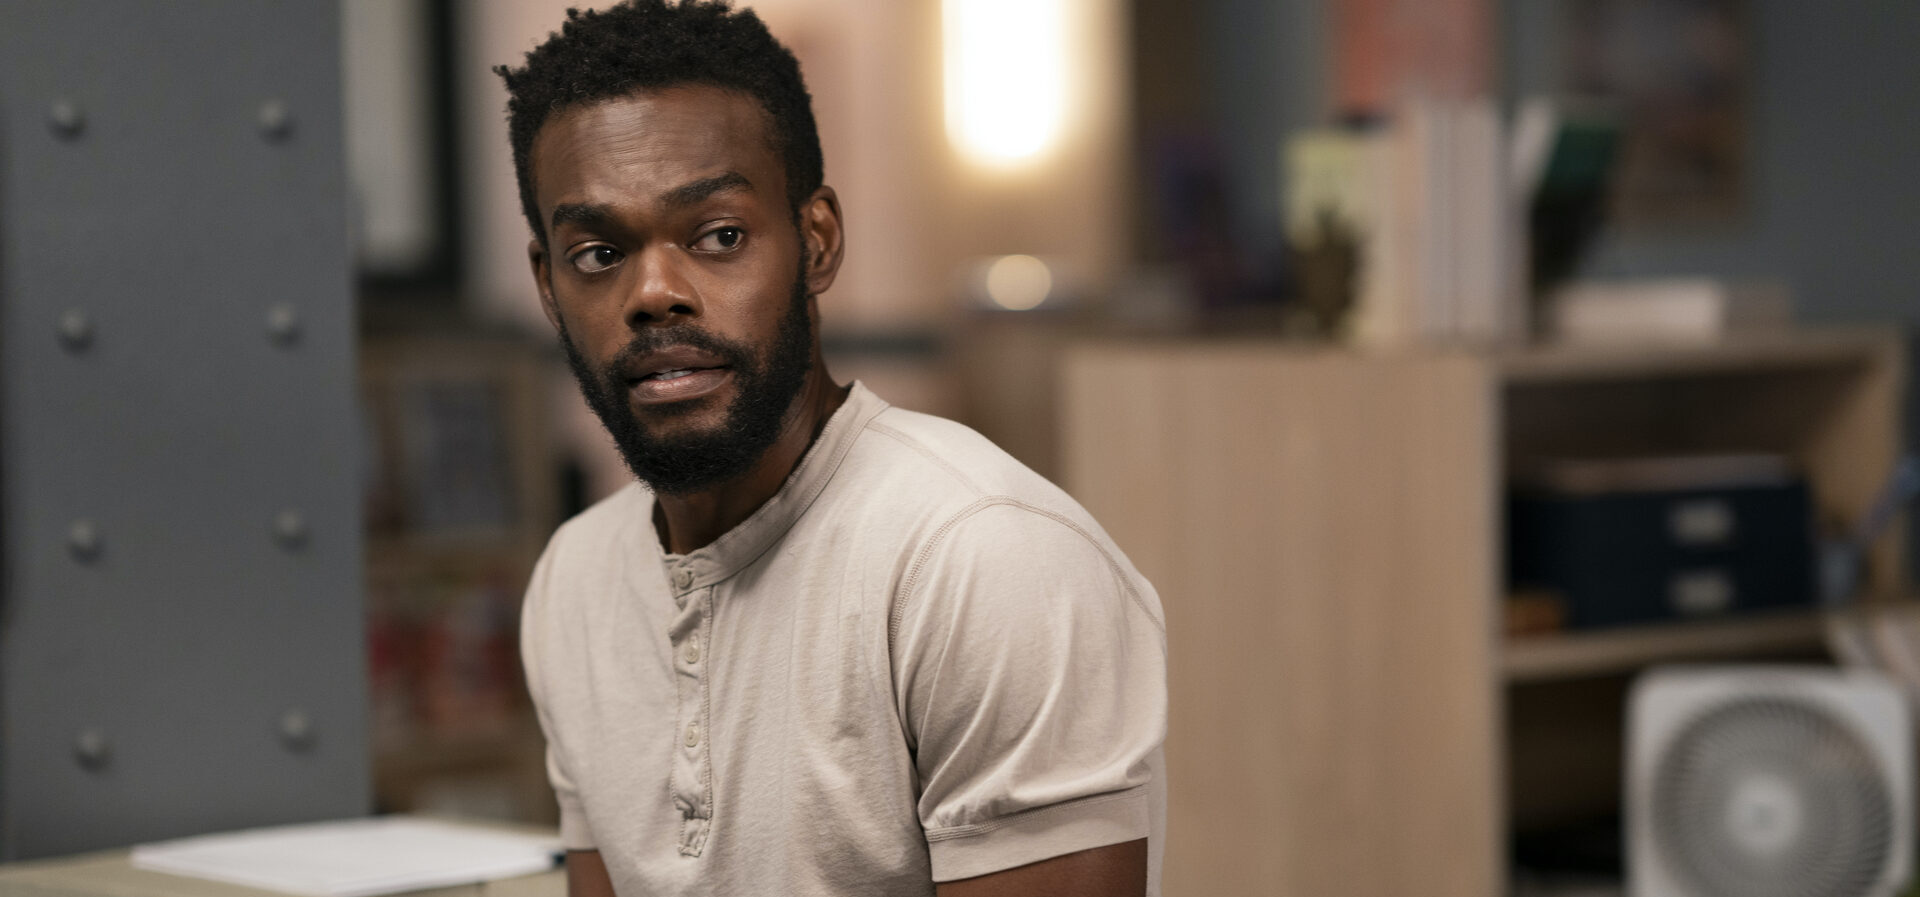 Blackfilm.com sits with William Jackson Harper to discuss the HBO Max premi...